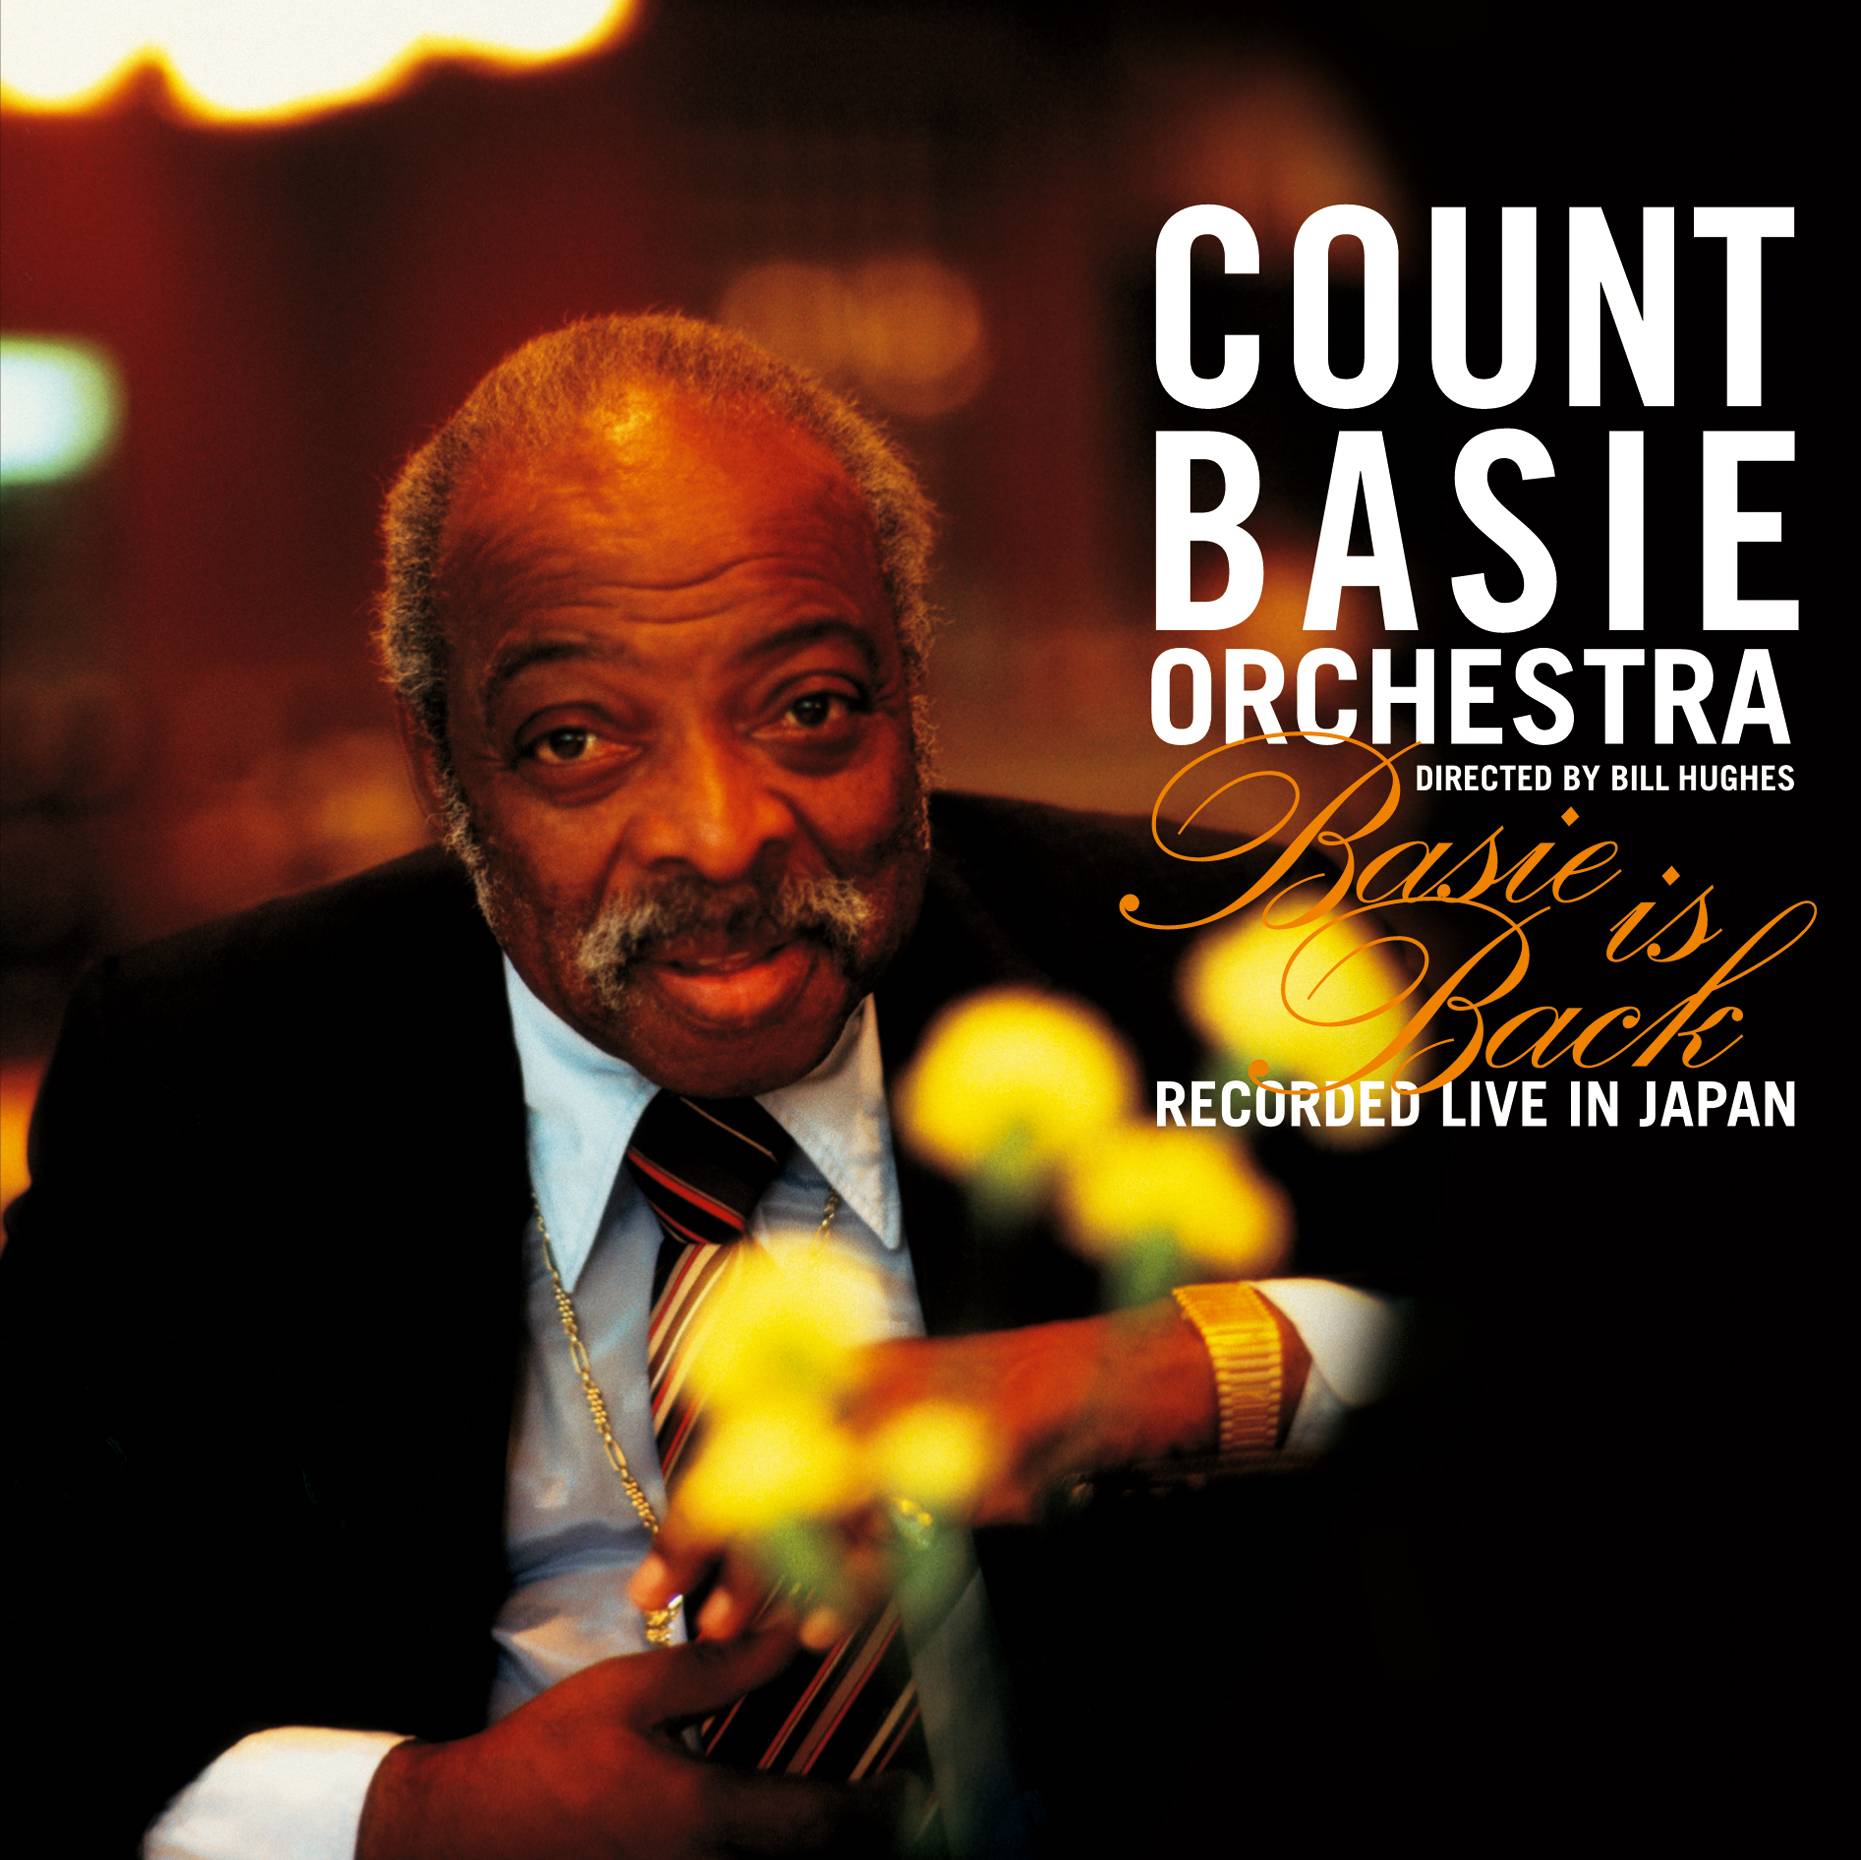 The Count Basie Orchestra - Basie Is Back (2006/2016) [e-Onkyo DSF DSD64/2.82MHz + FLAC 24bit/96kHz]